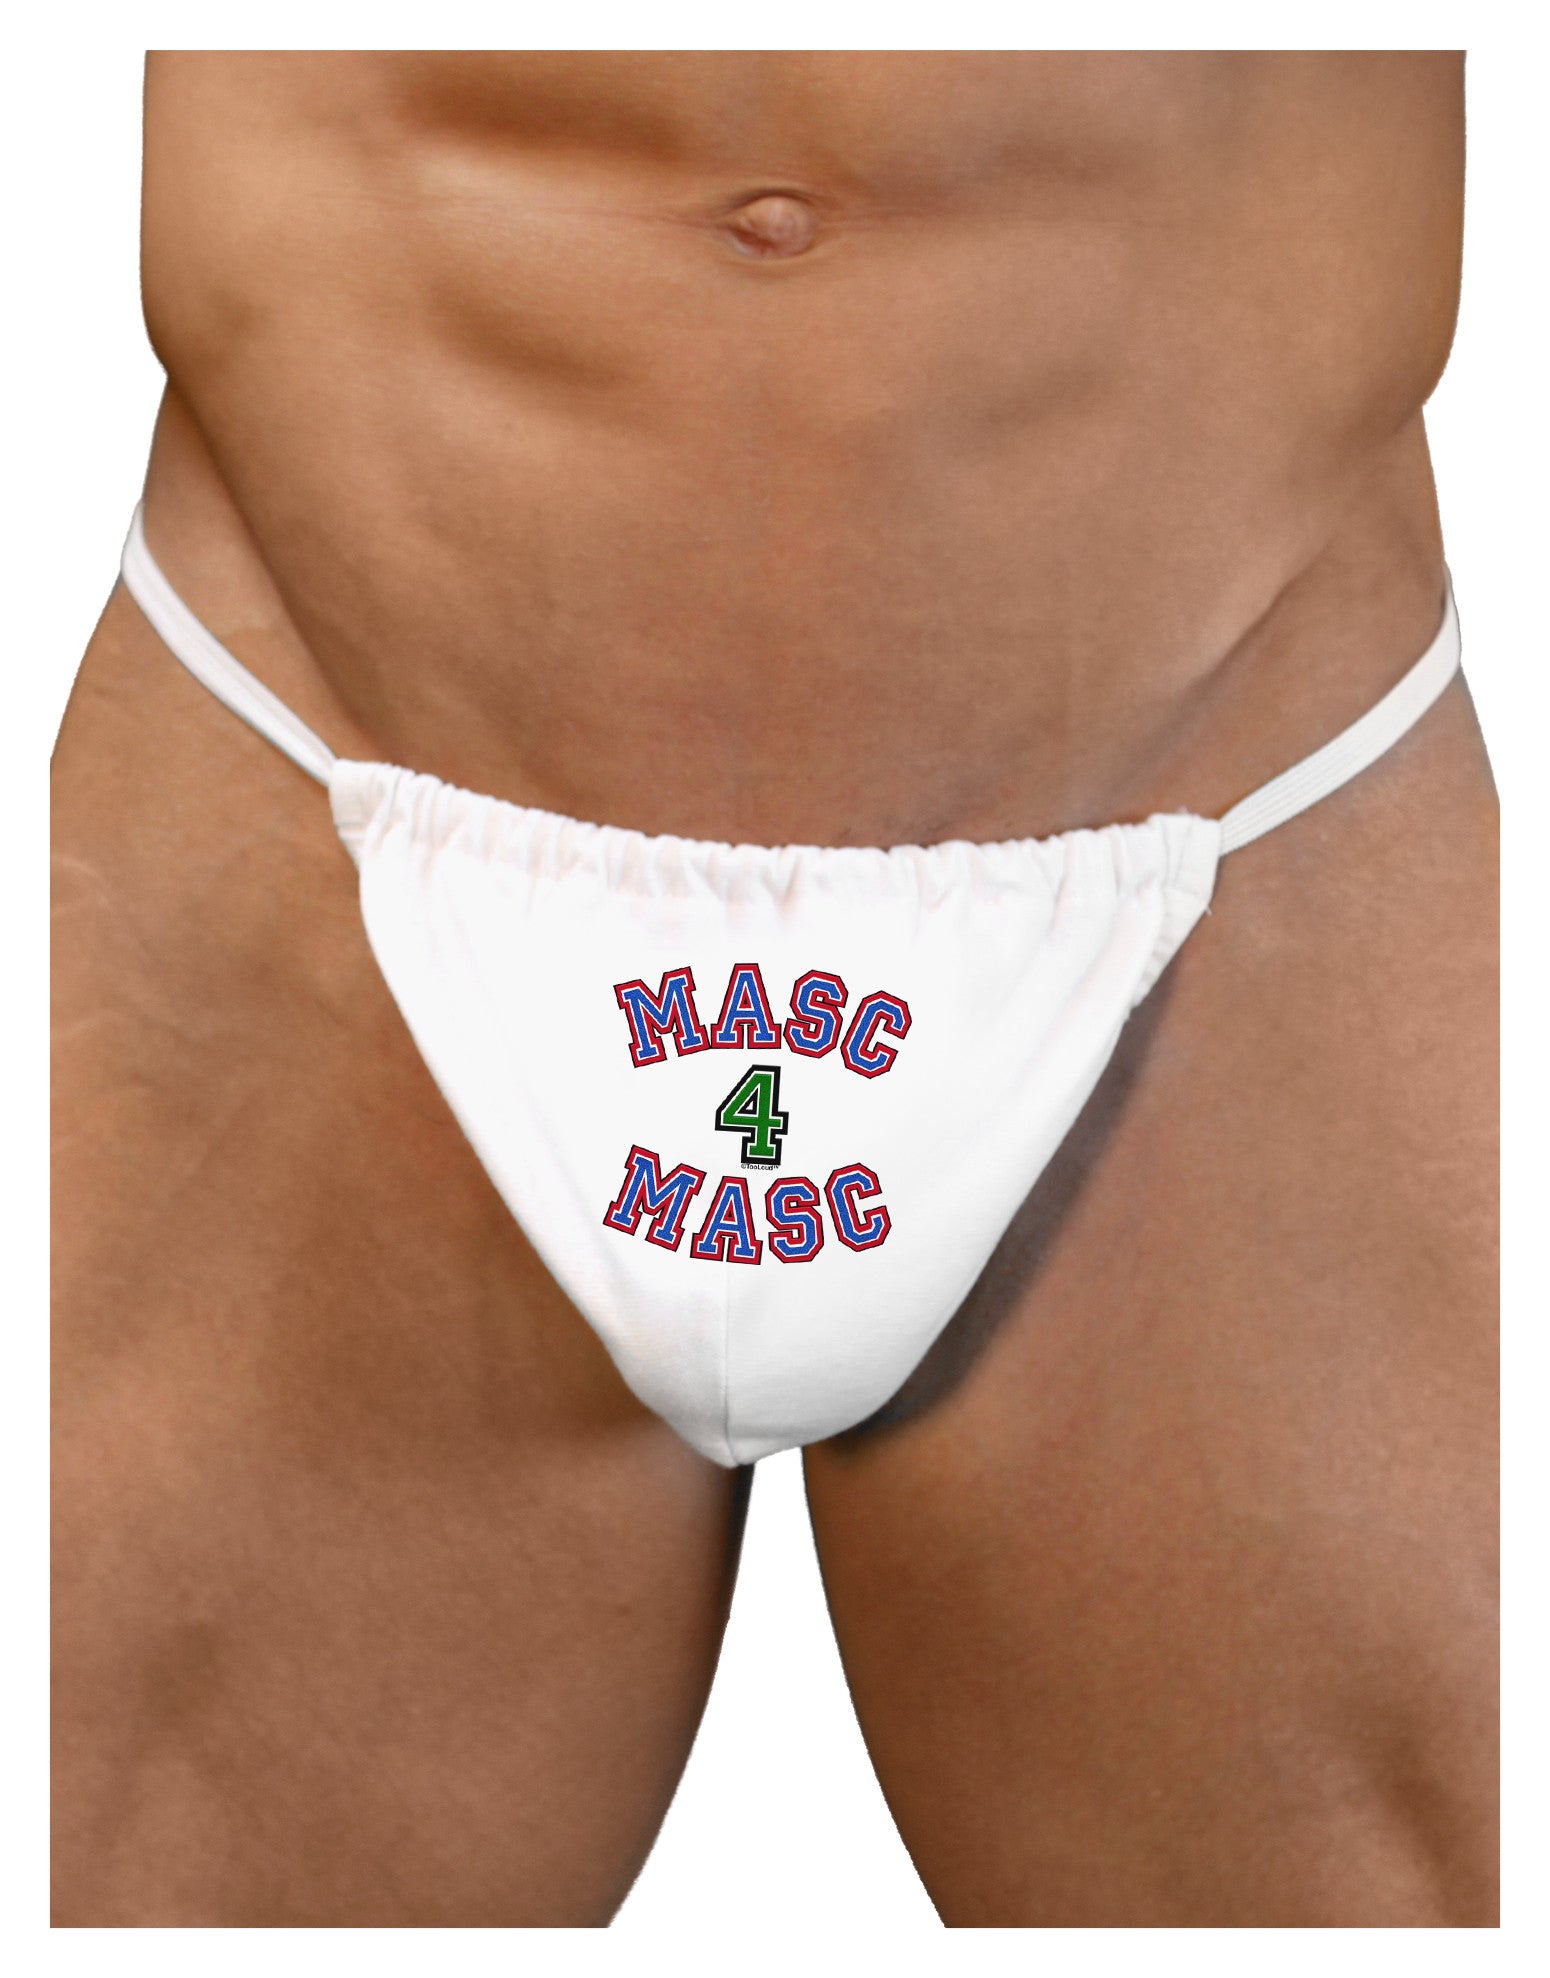 Masc 4 Masc College Stud Mens NDS Wear Boxer Brief Underwear by